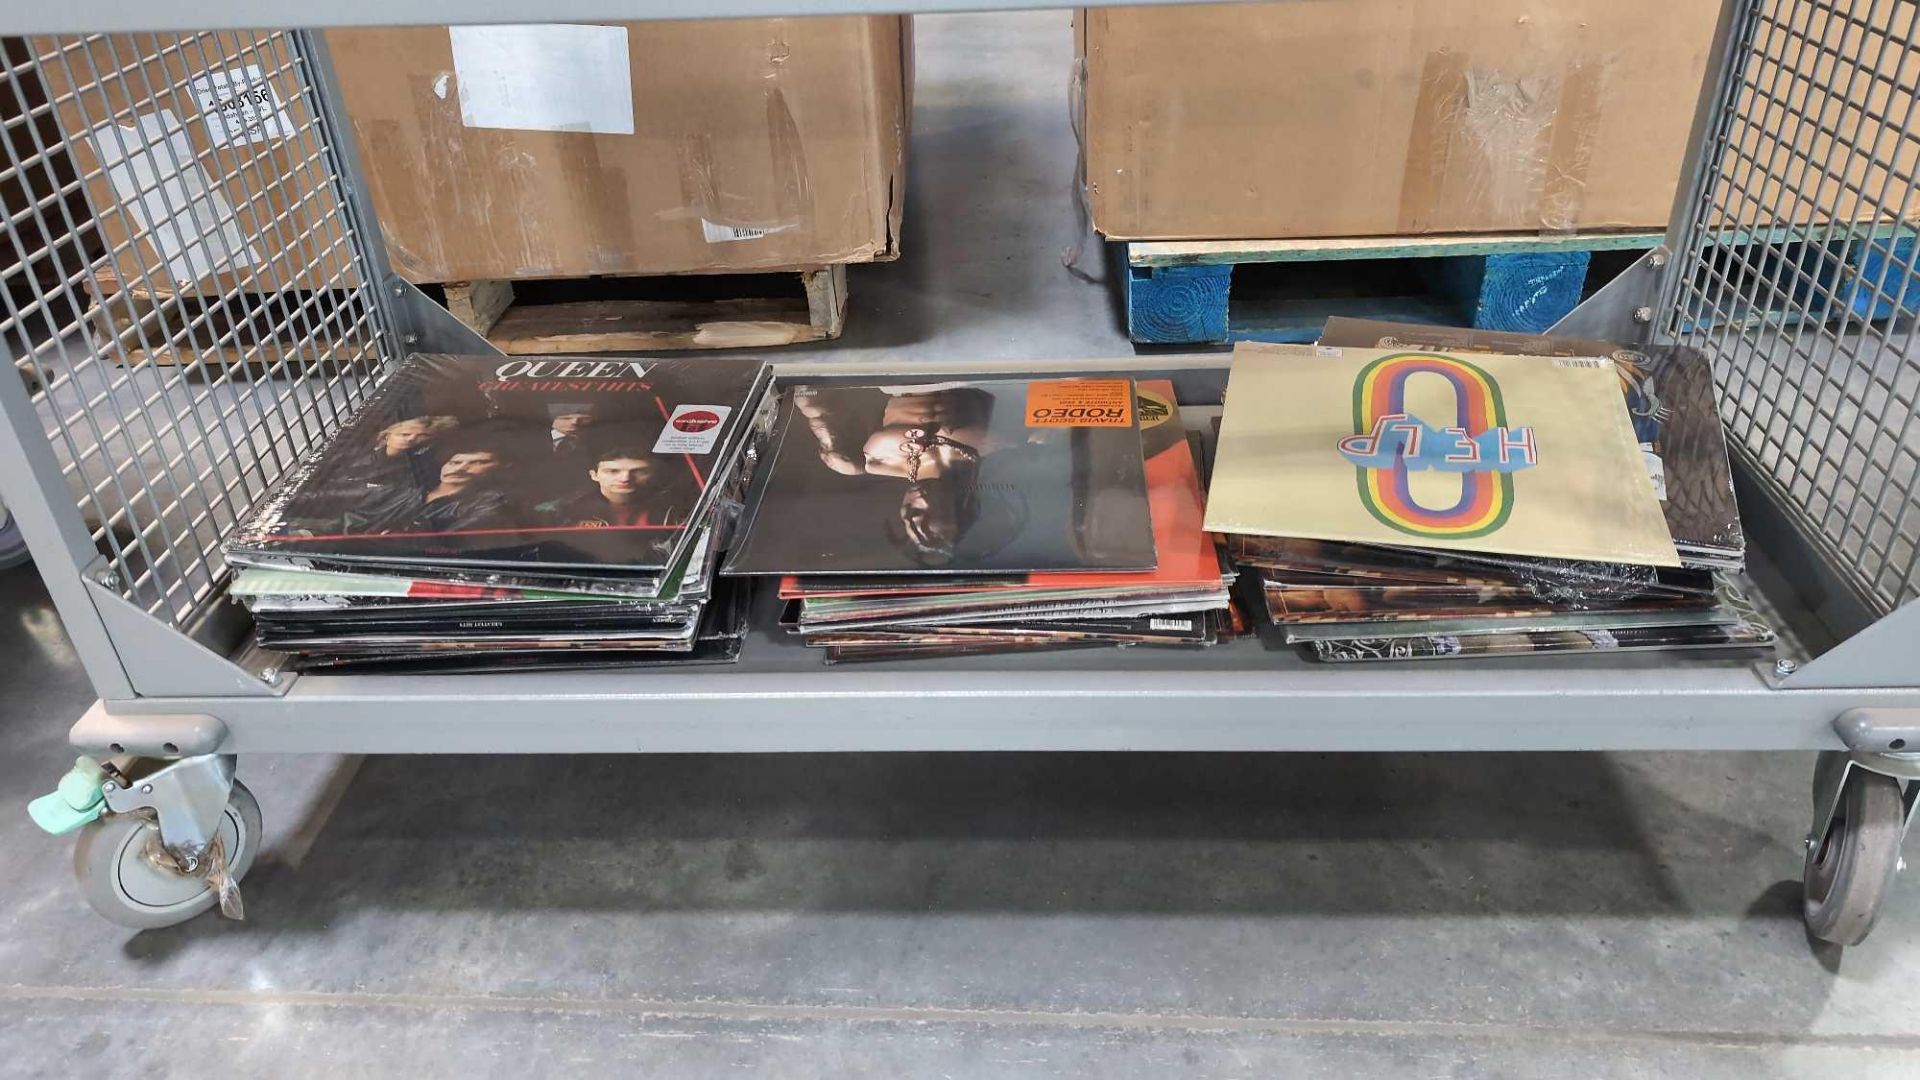 Records: taylor Swift, Odie, queen, face stabber , and more - Image 13 of 16